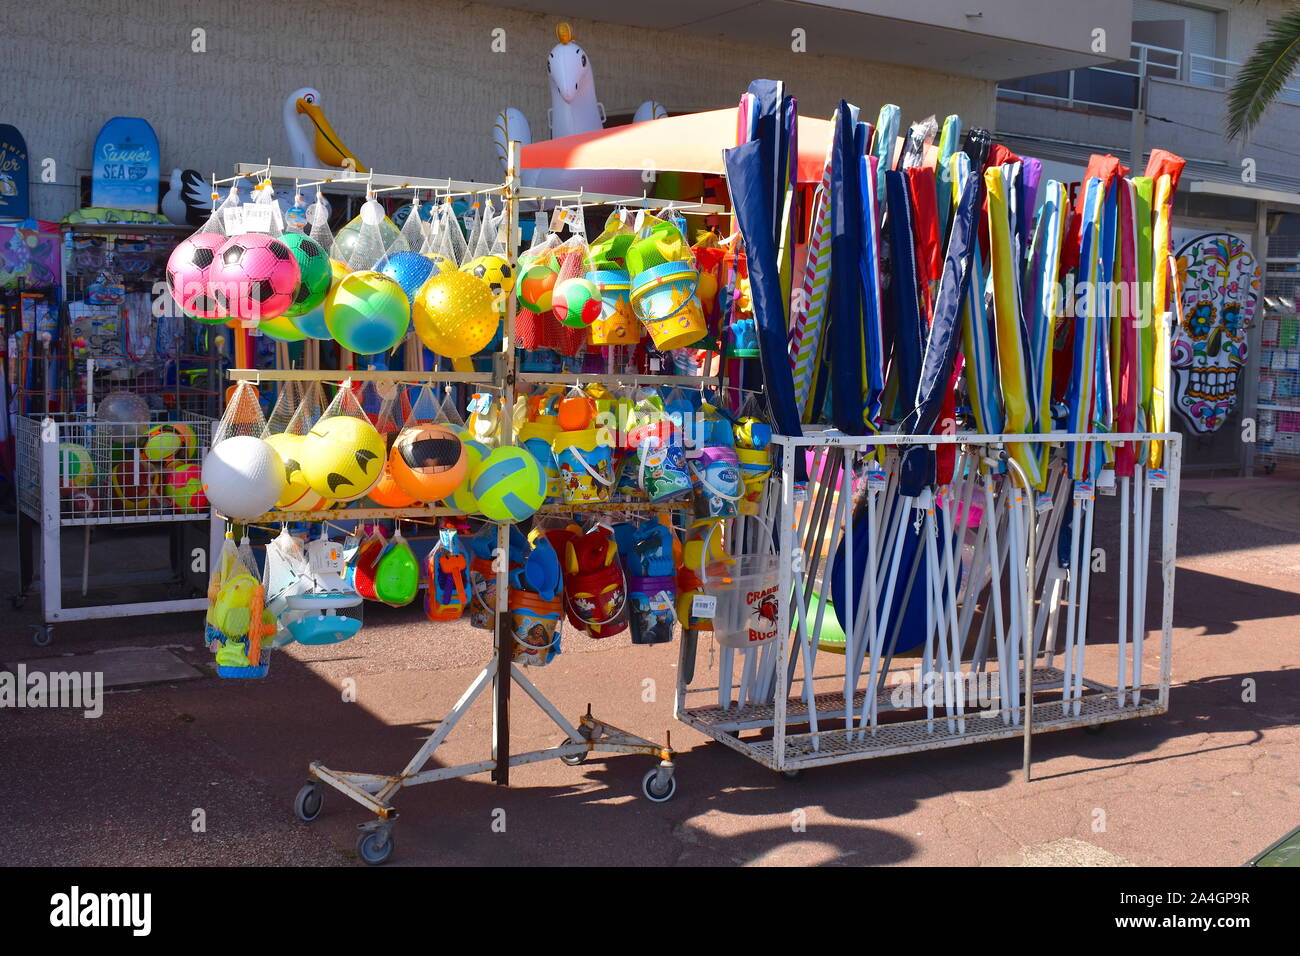 Bucket, spade and mould sets, beach balls, beach tennis, swimming inflatables and body boards sold on the promenade in south of France. Stock Photo